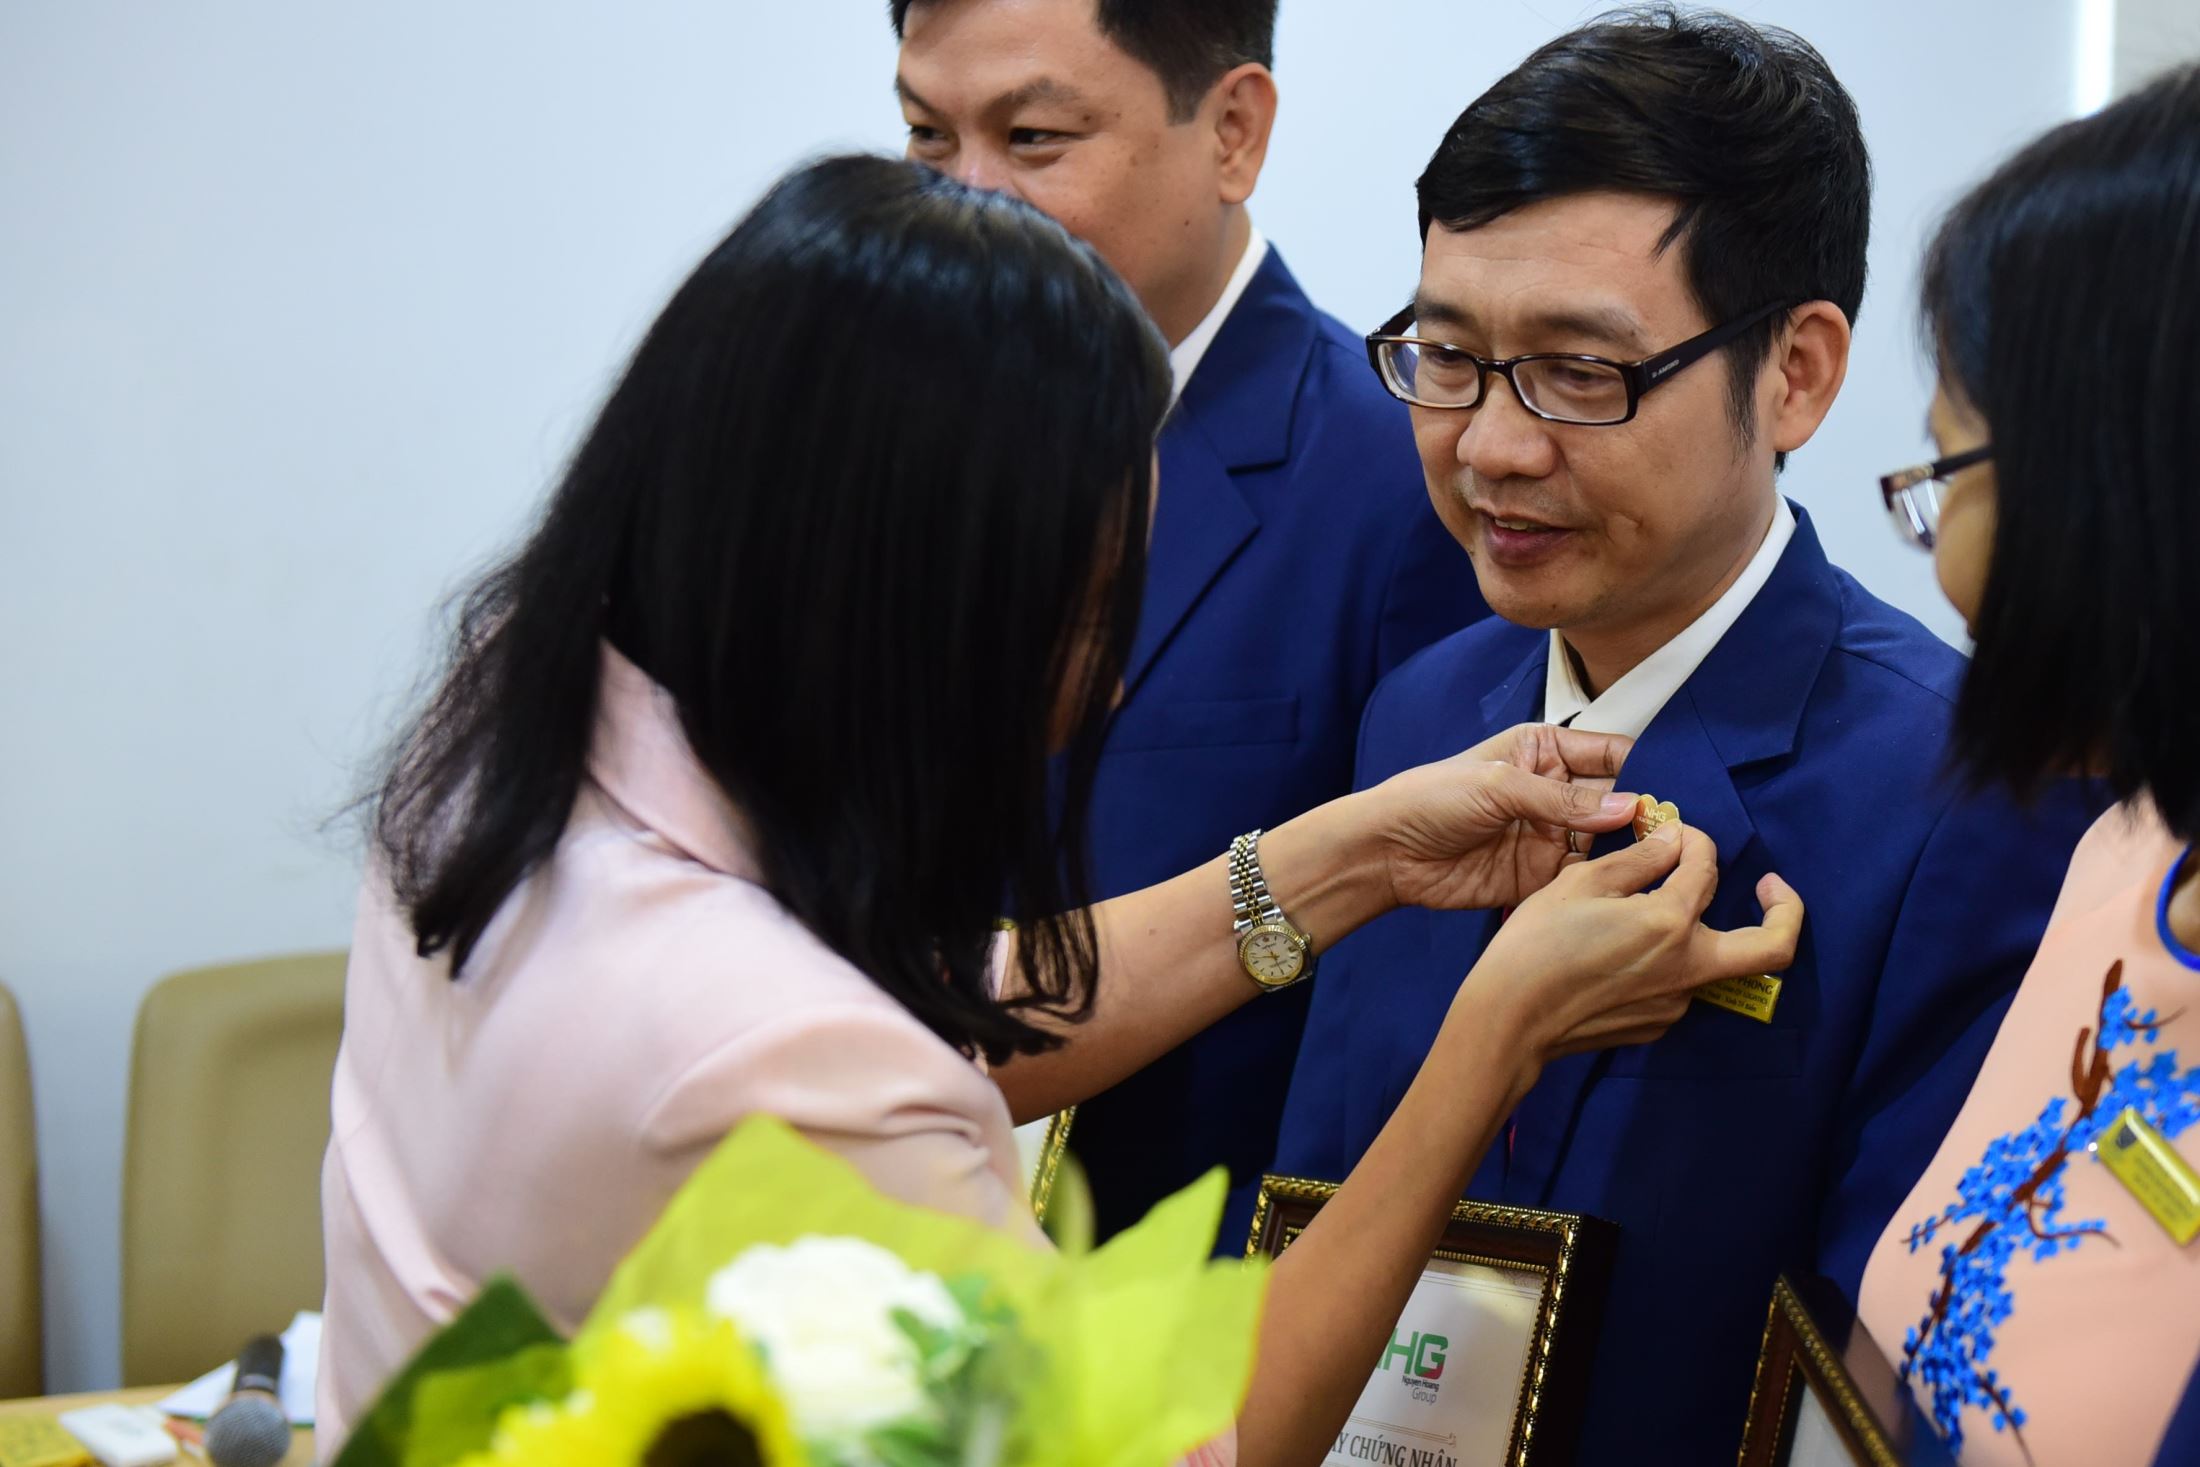 Dr. Doan Hue Dung - Managing Director of SNA presented the 18k gold heart badge to the teachers honored to receive the "NHG's Teacher Award 2017"